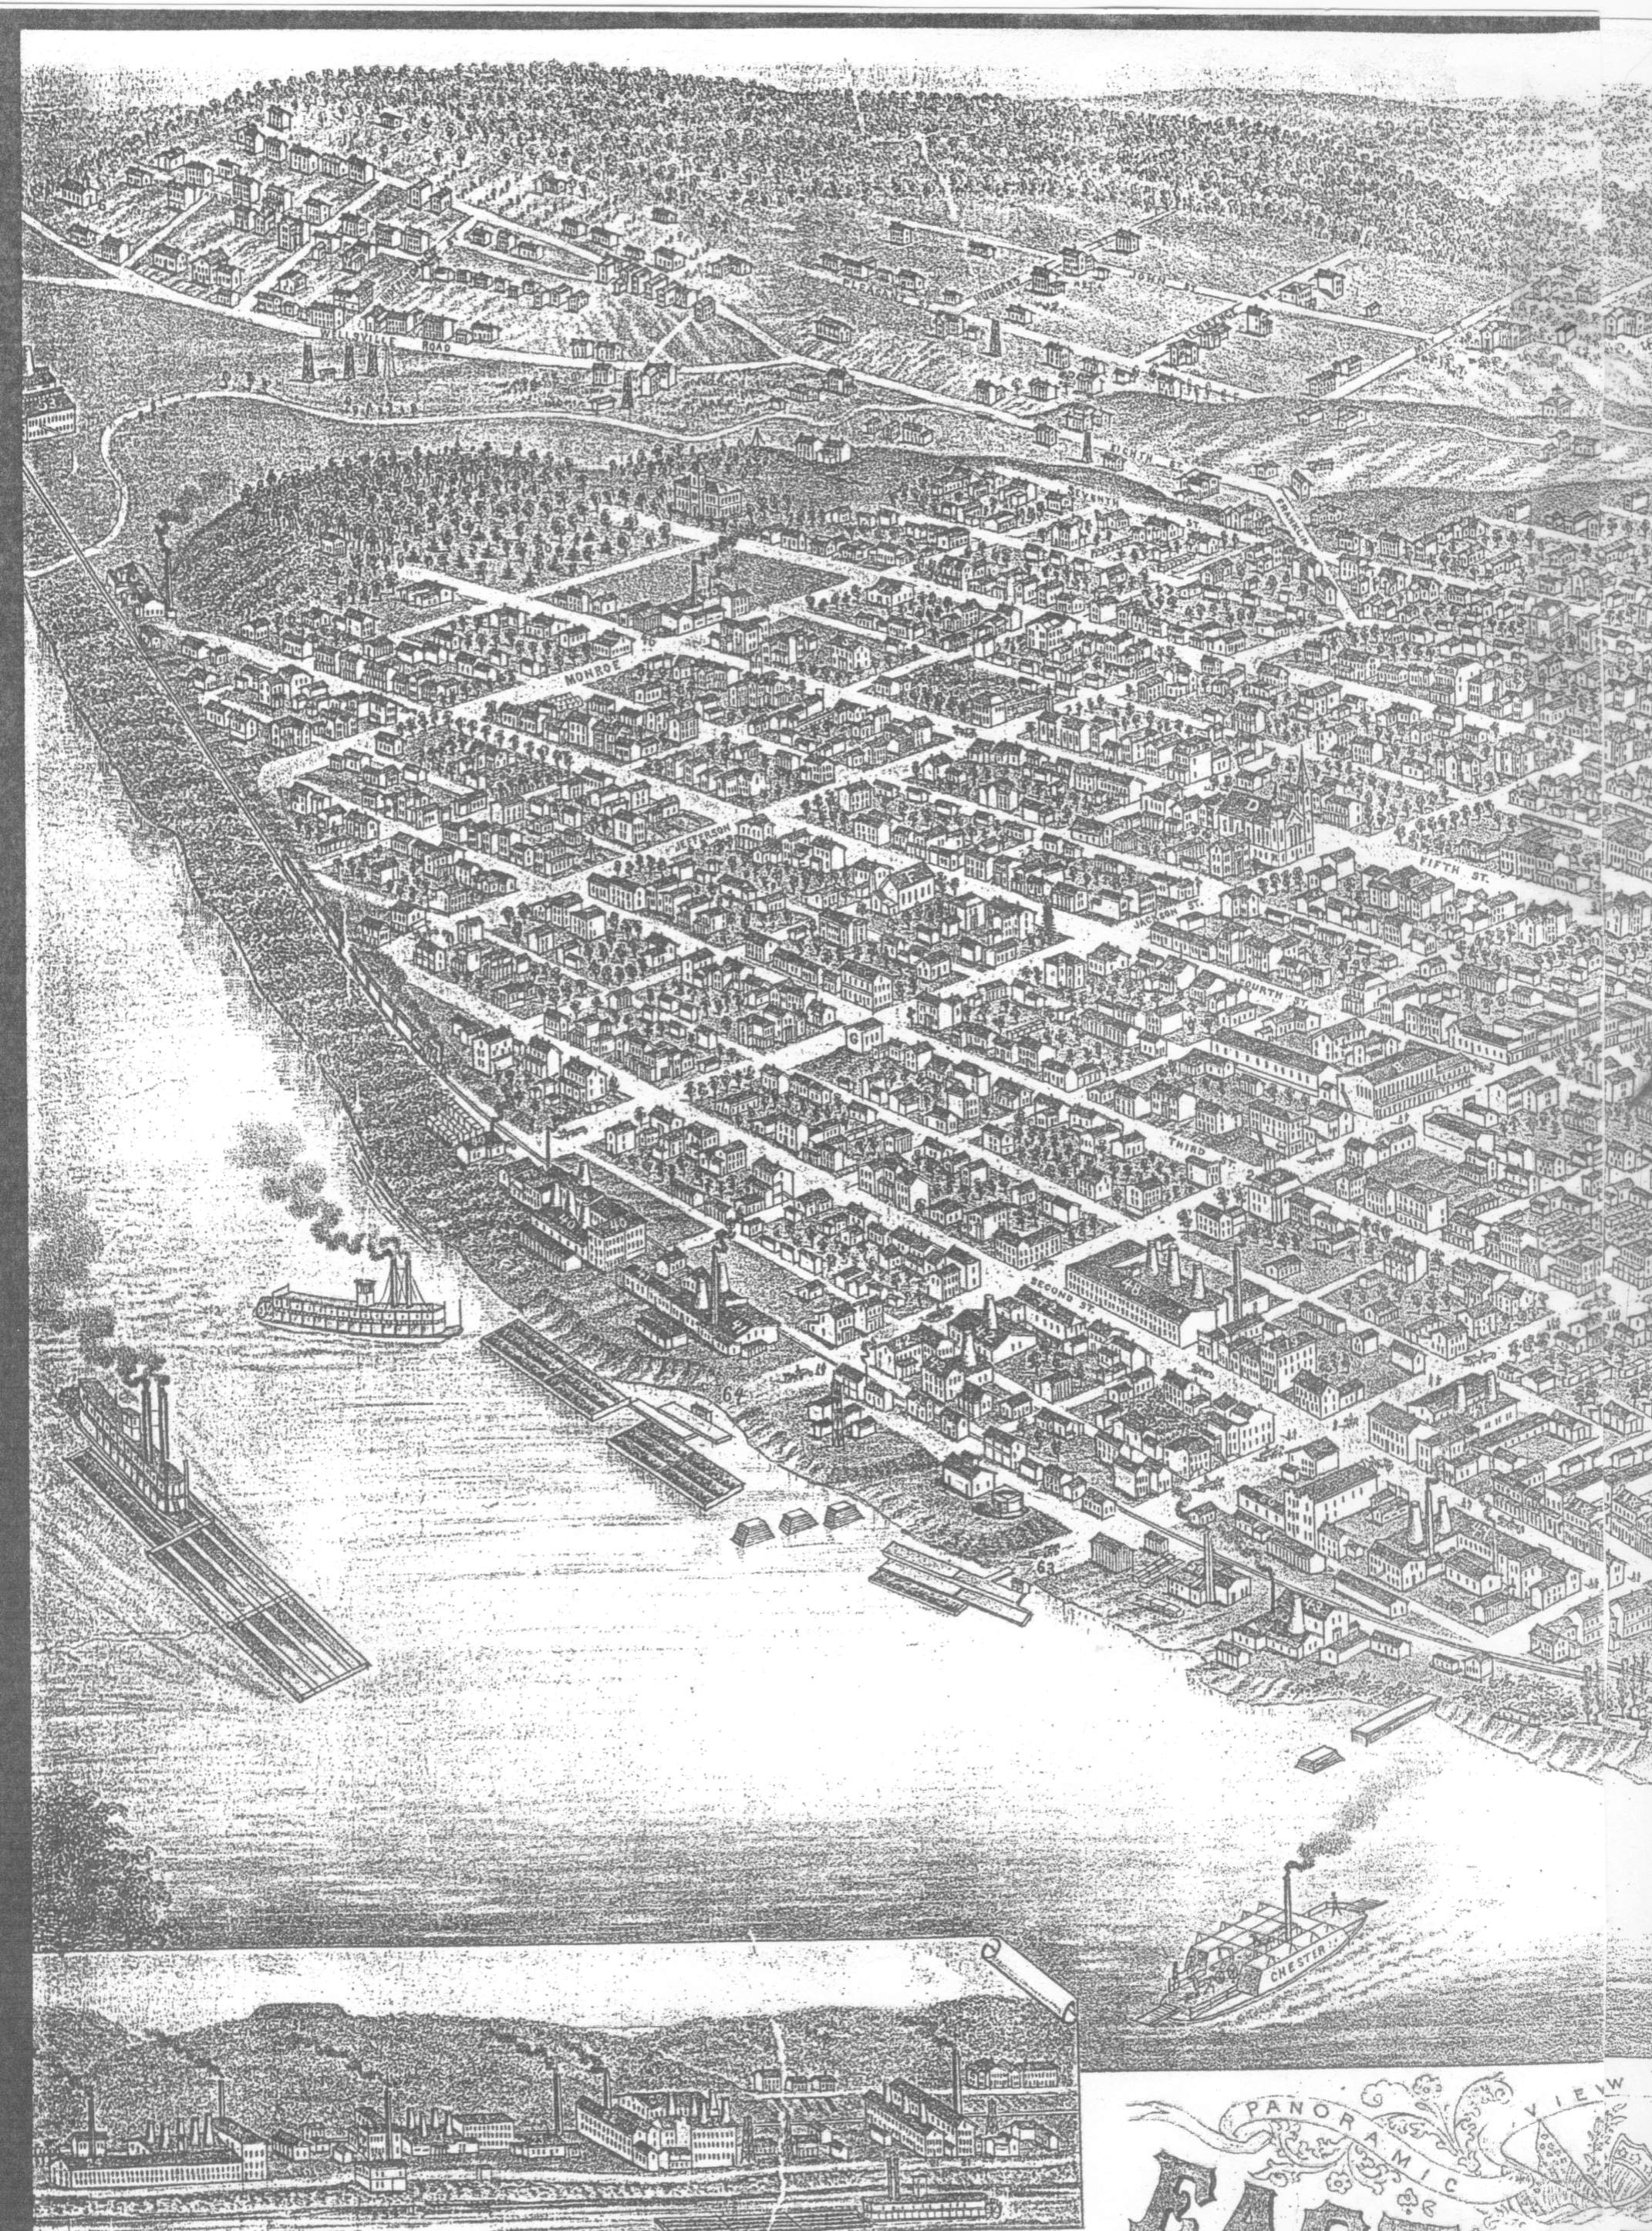 West end map 1877